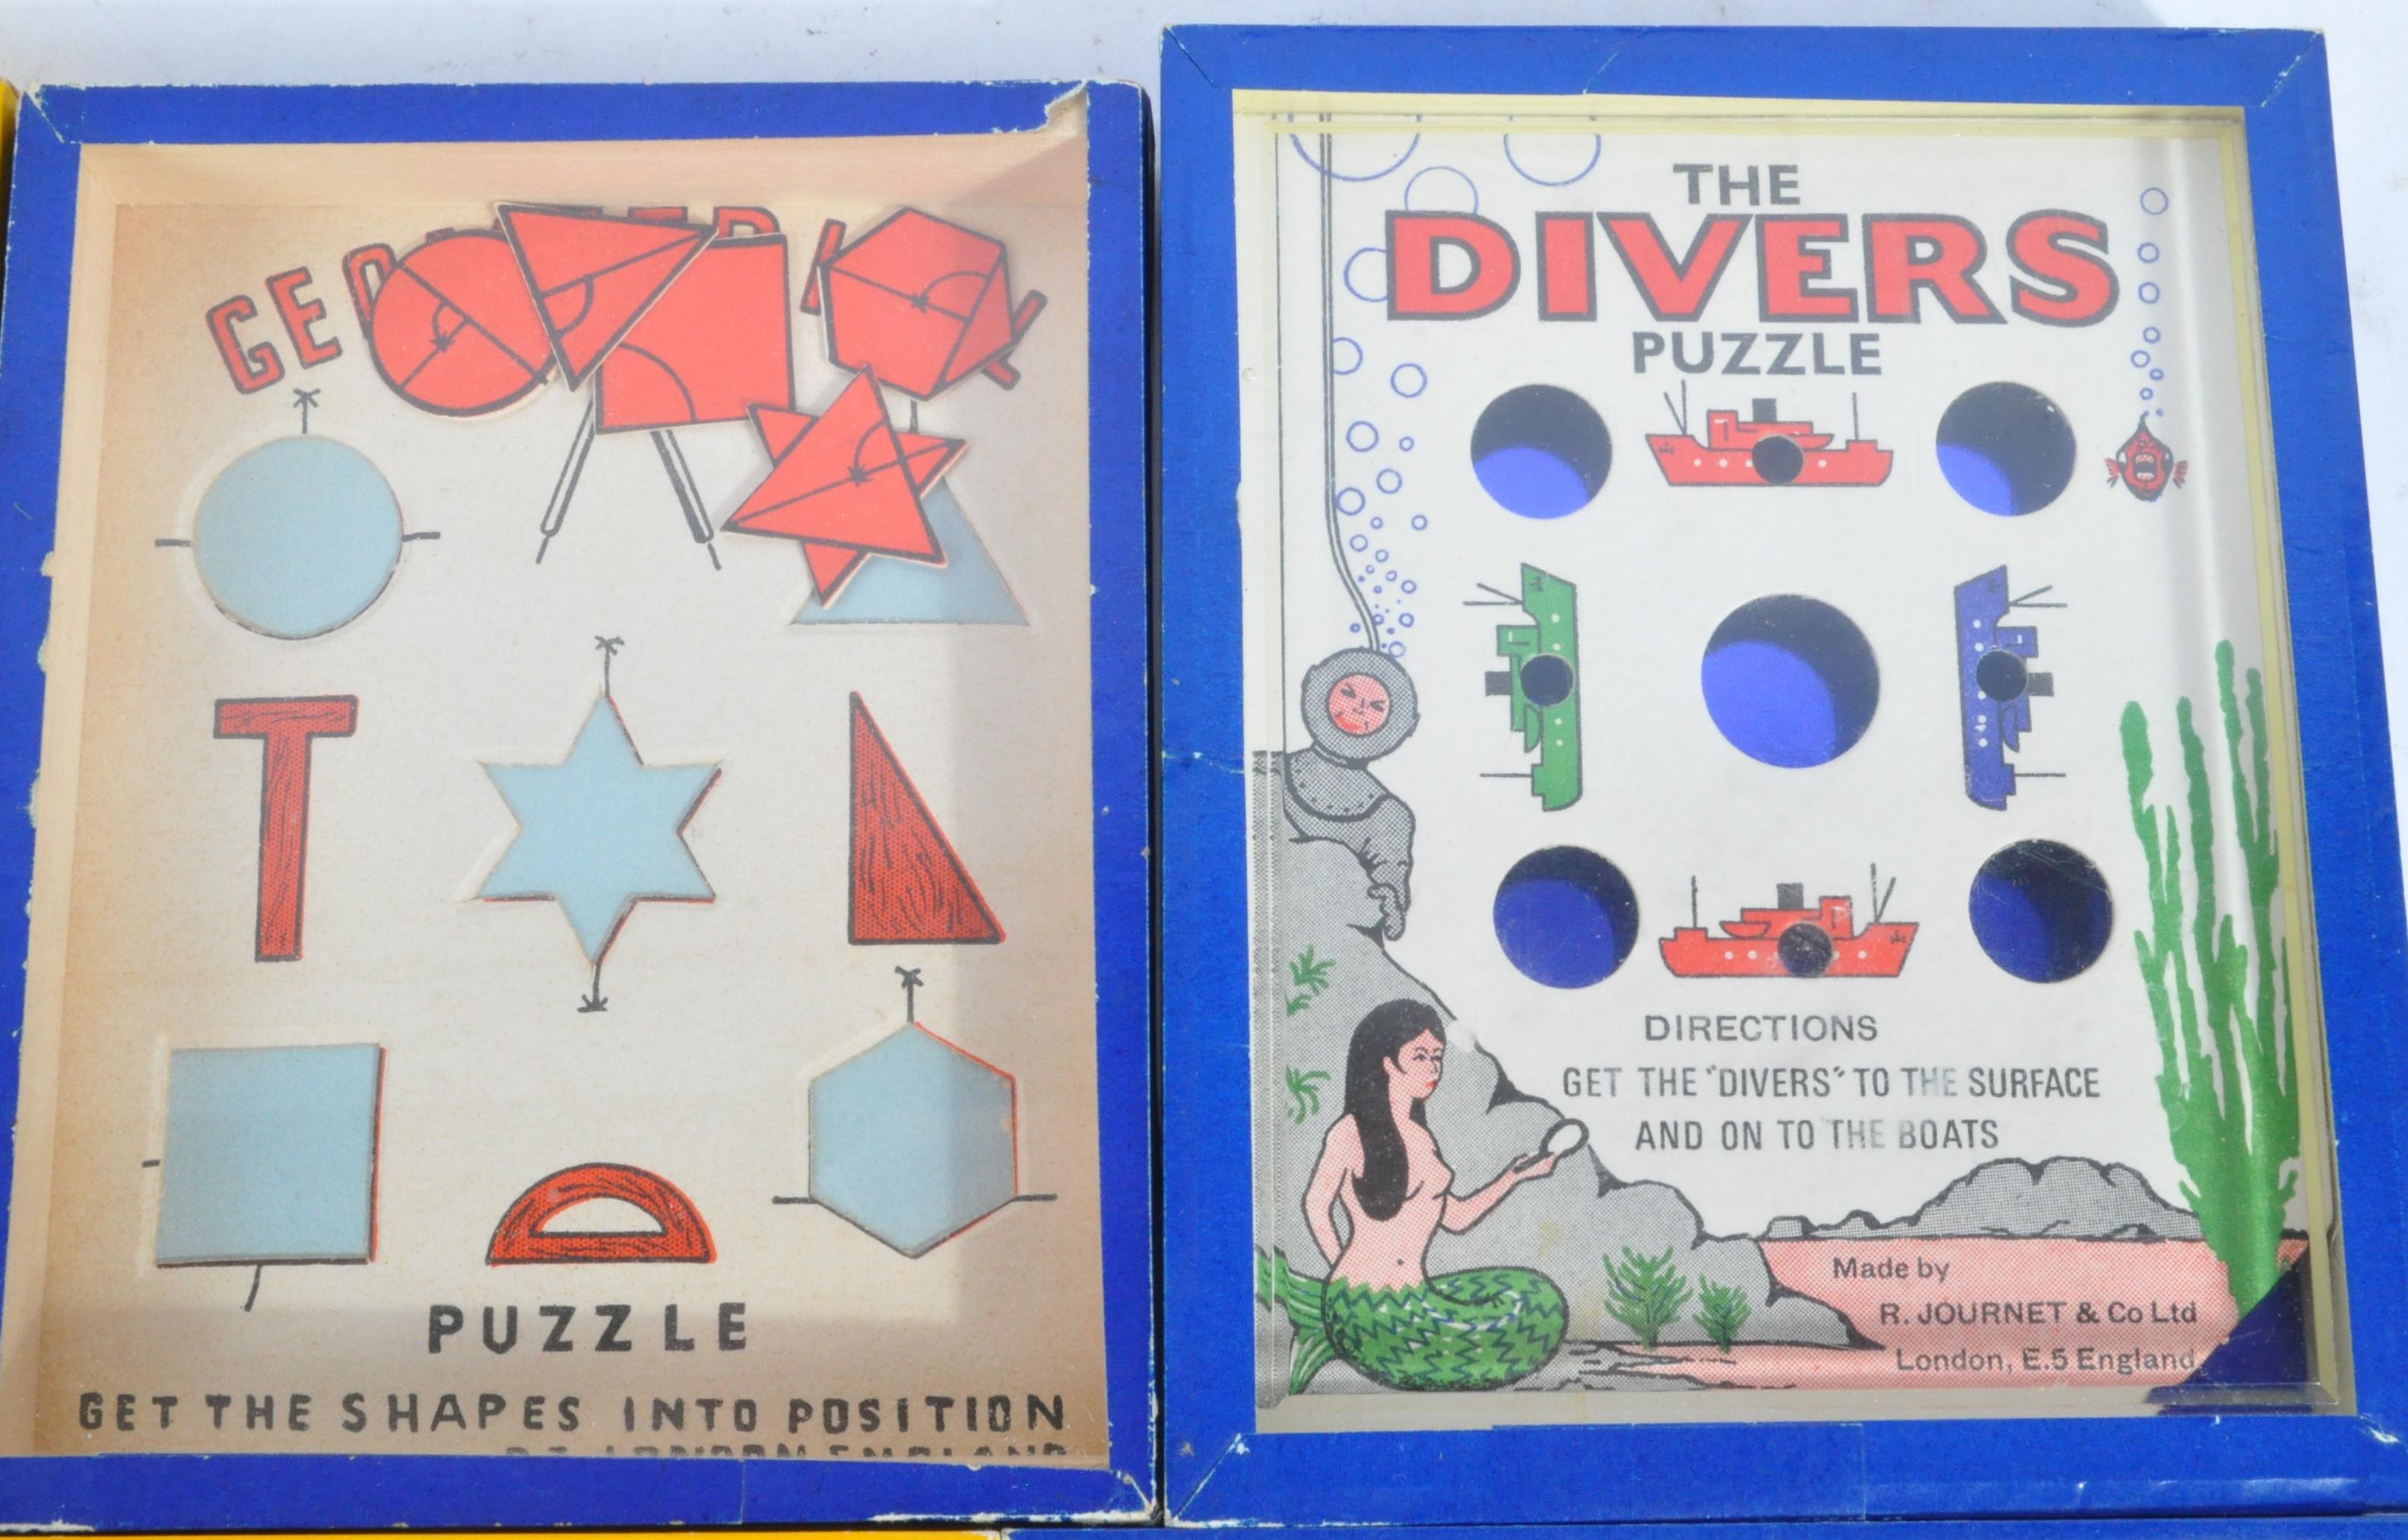 COLLECTION OF VINTAGE 1950S RJ SERIES OF POPULAR PUZZLES - Image 4 of 6